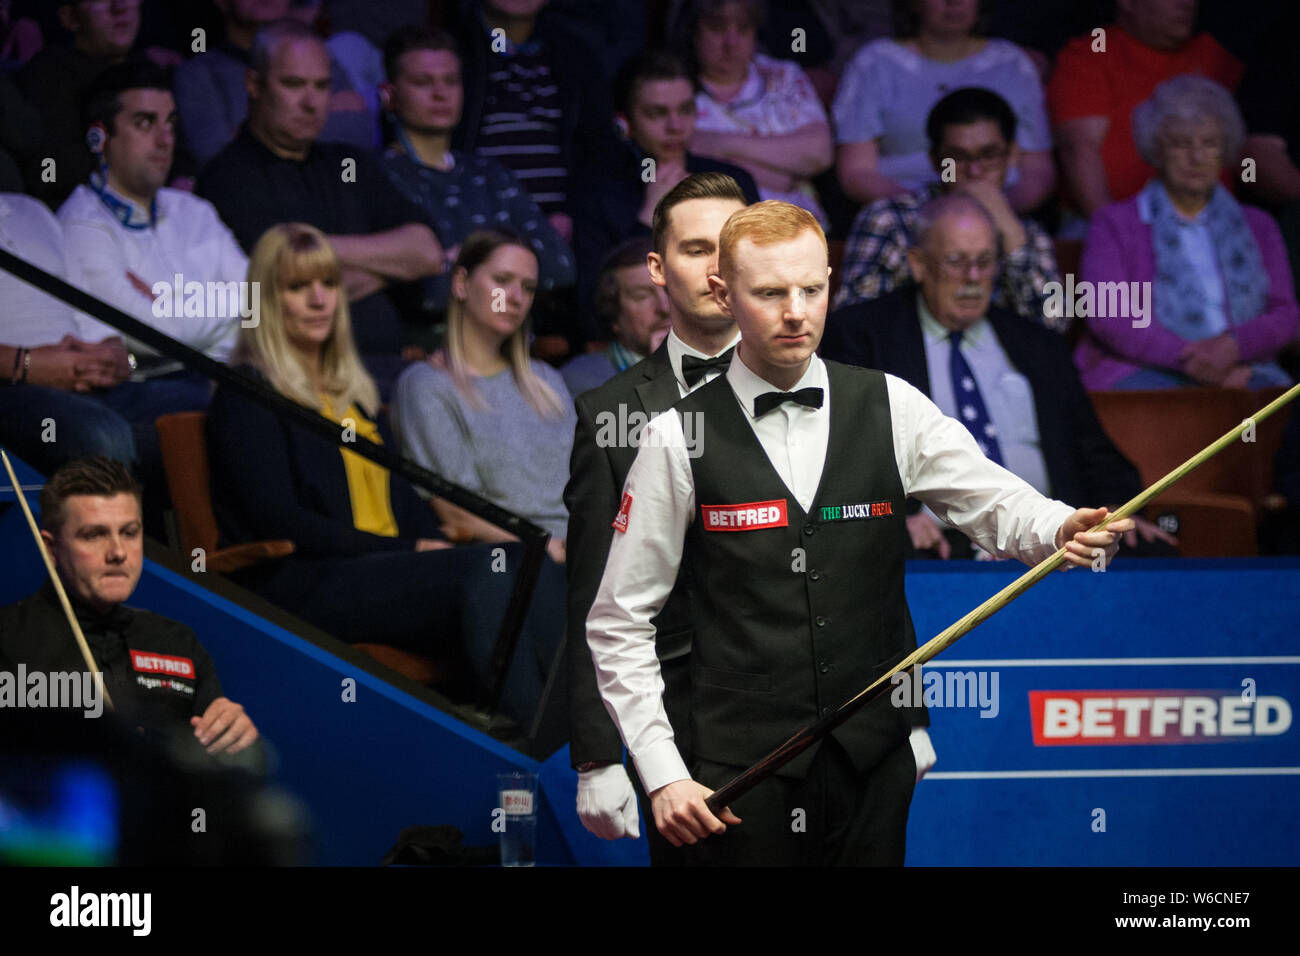 Anthony McGill of Scotland considers a shot to Ryan Day of Wales in their first round match during the 2018 Betfred World Snooker Championship at the Stock Photo